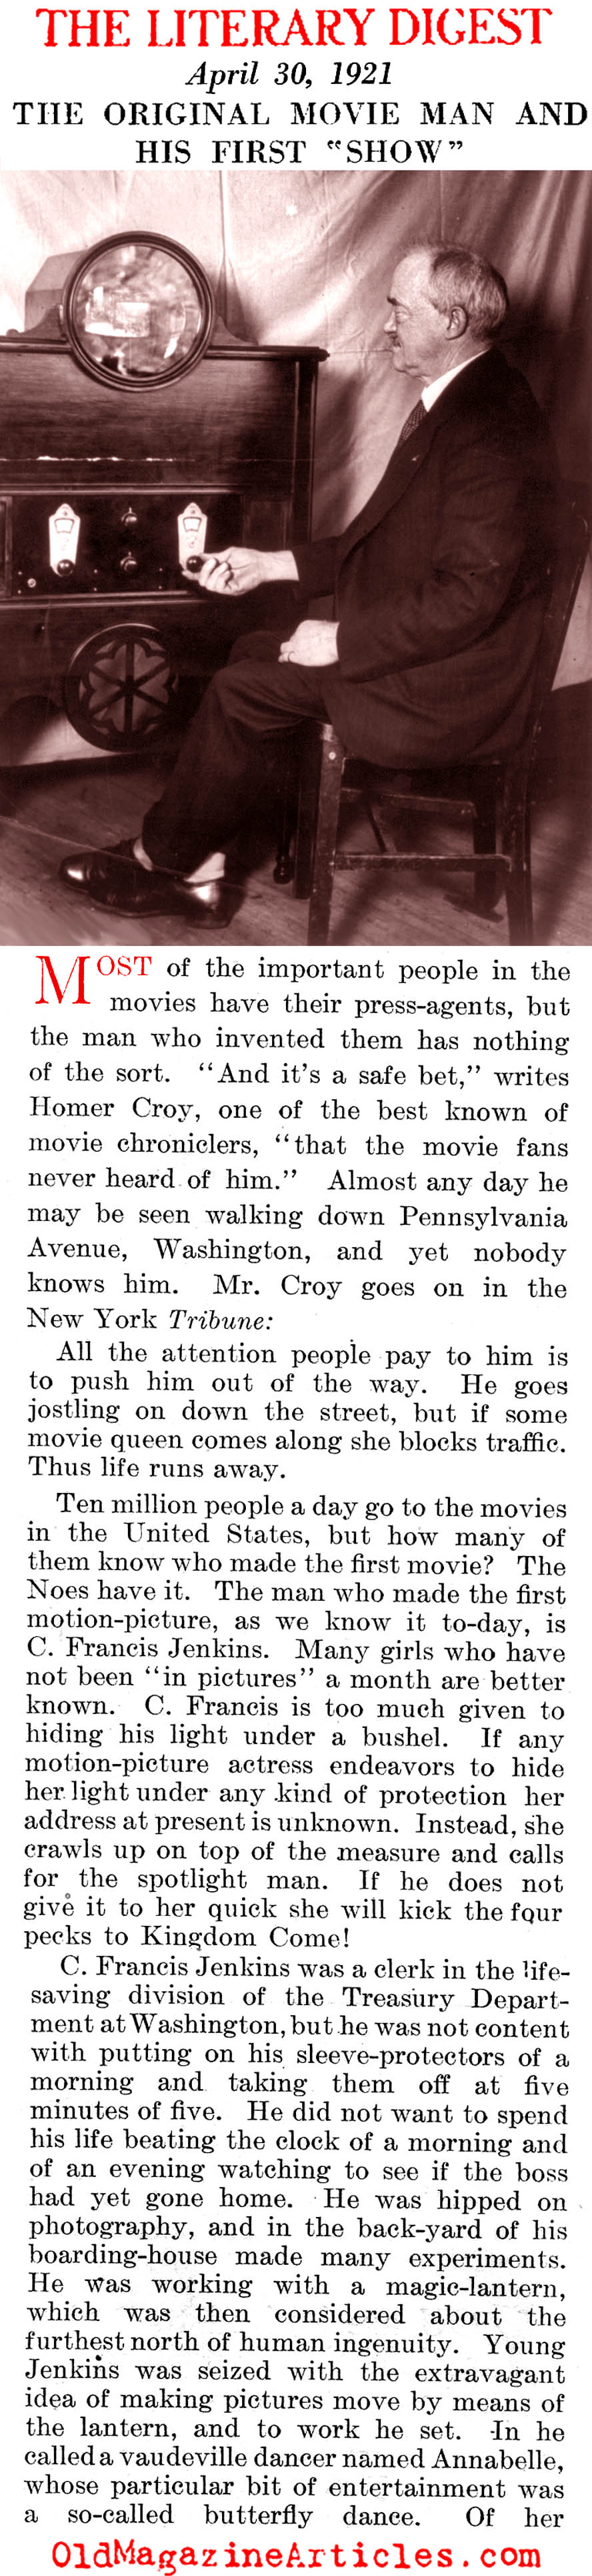 He Made the Pictures Move (The Literary Digest, 1921)